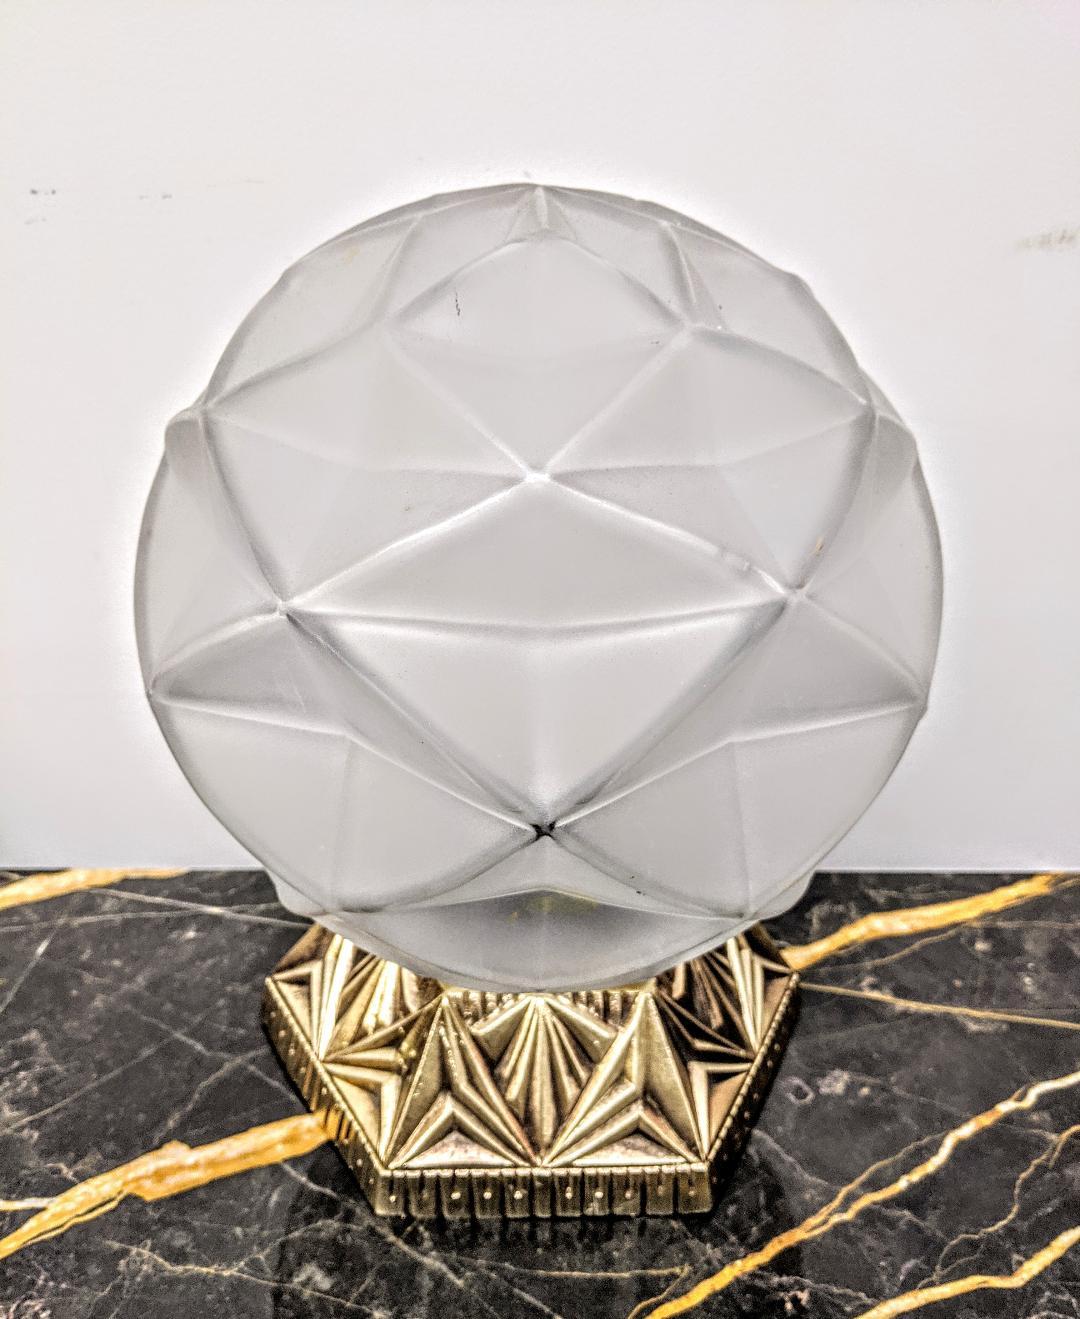 A French Art Deco geometric design table lamp. The glass shade is frosted with polished details in great condition, modest wear commensurate with age. Mounted in a decorative bronze base in its original patina. The table lamp has been rewired for